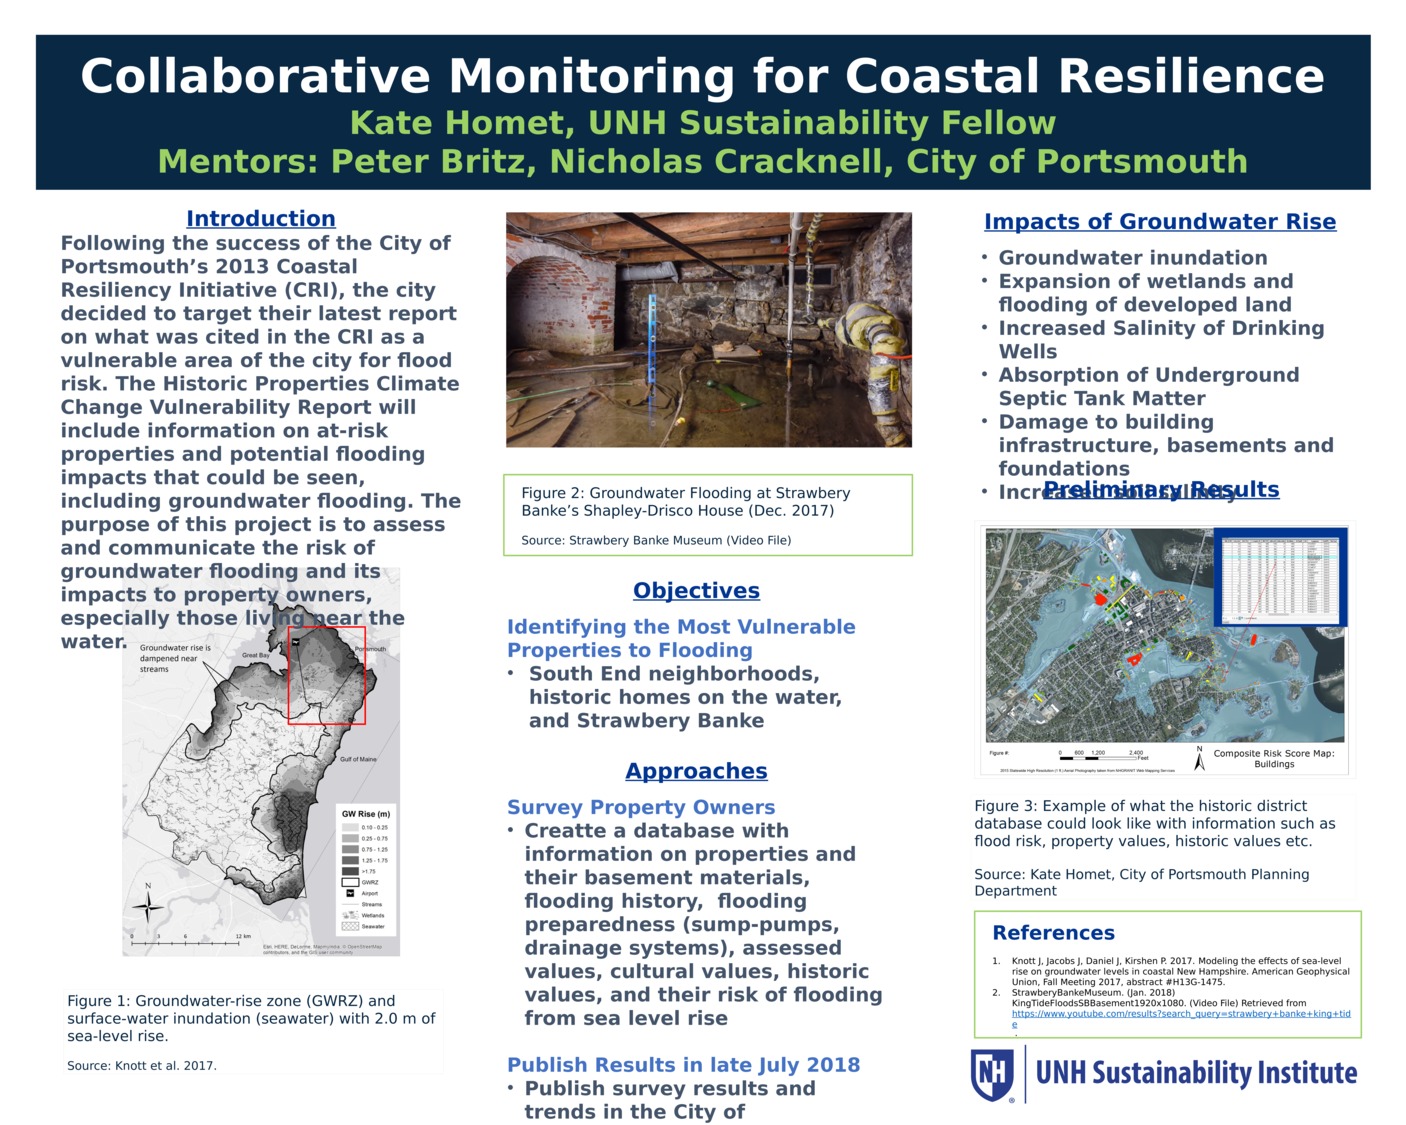 Collaborative Monitoring For Coastal Resilience by KateHomet